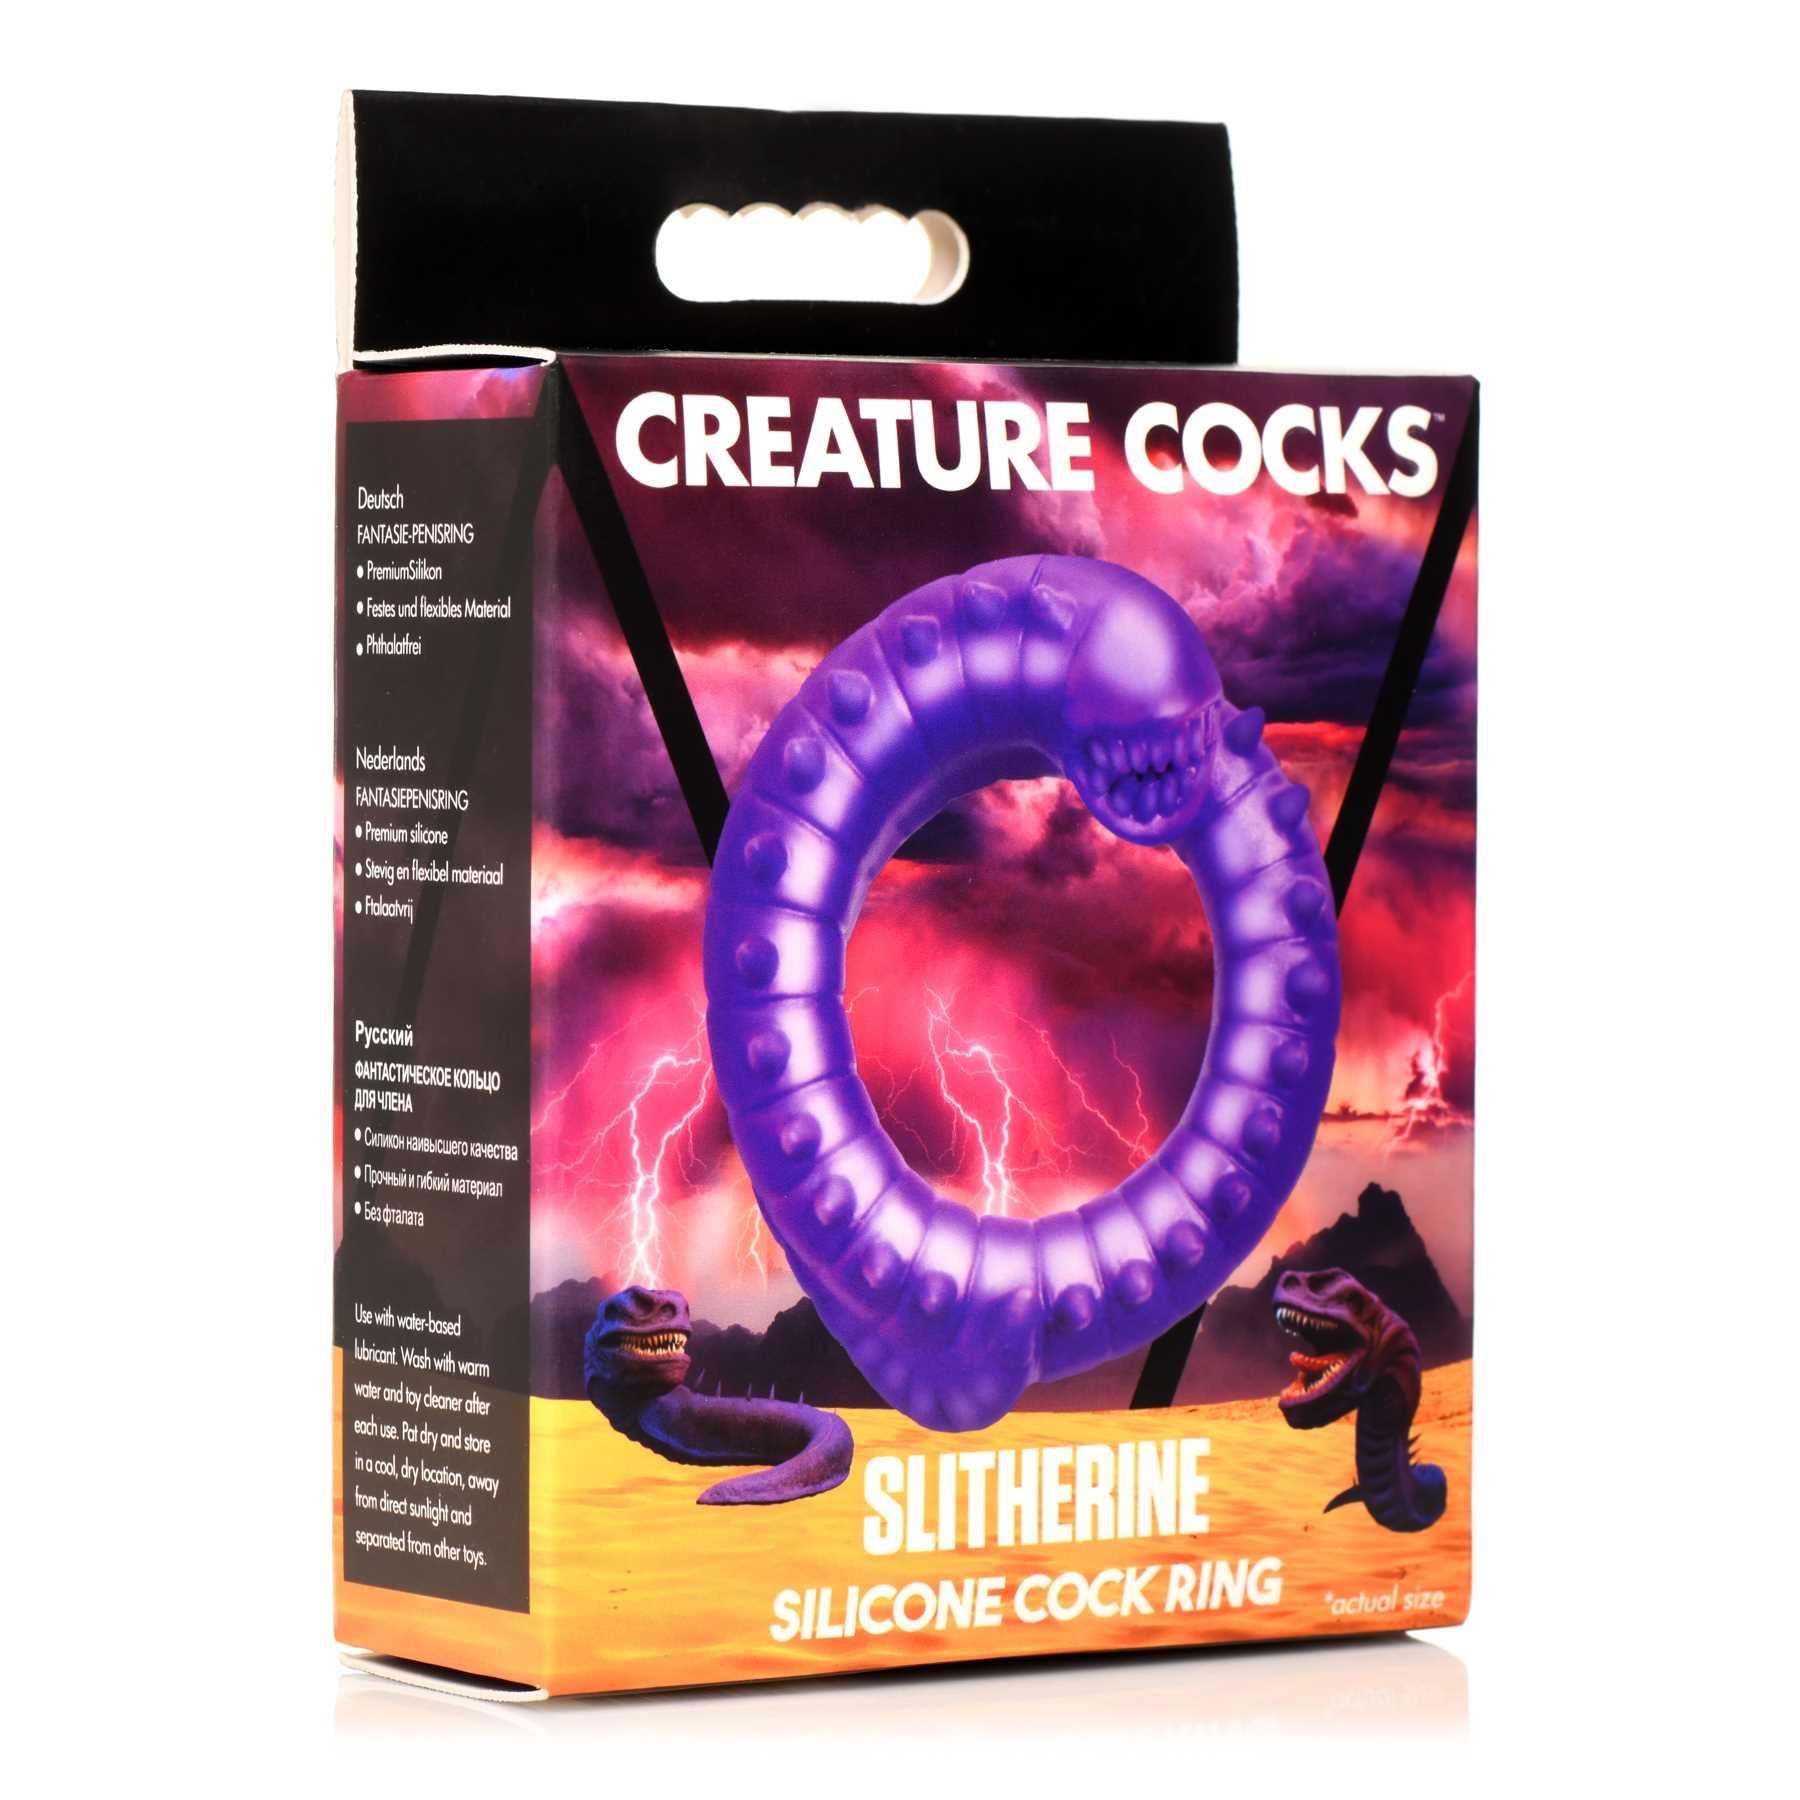 Creature Cocks Slitherine Silicone Cock Ring packaging